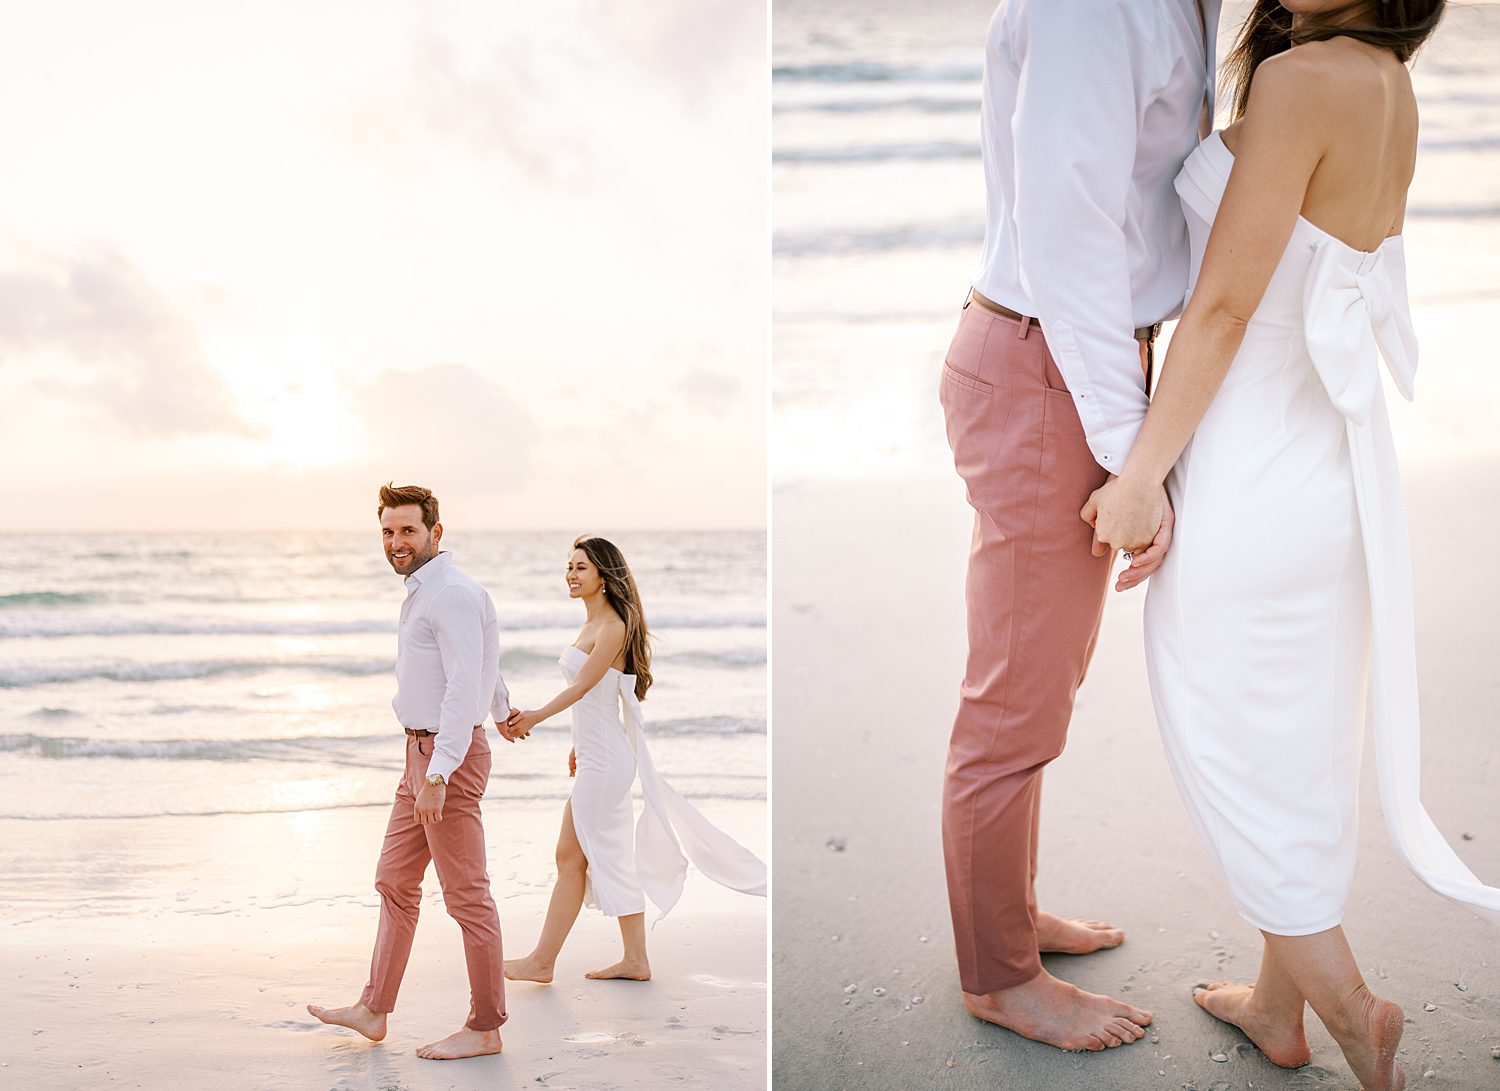 man leads bride on beach at sunset 